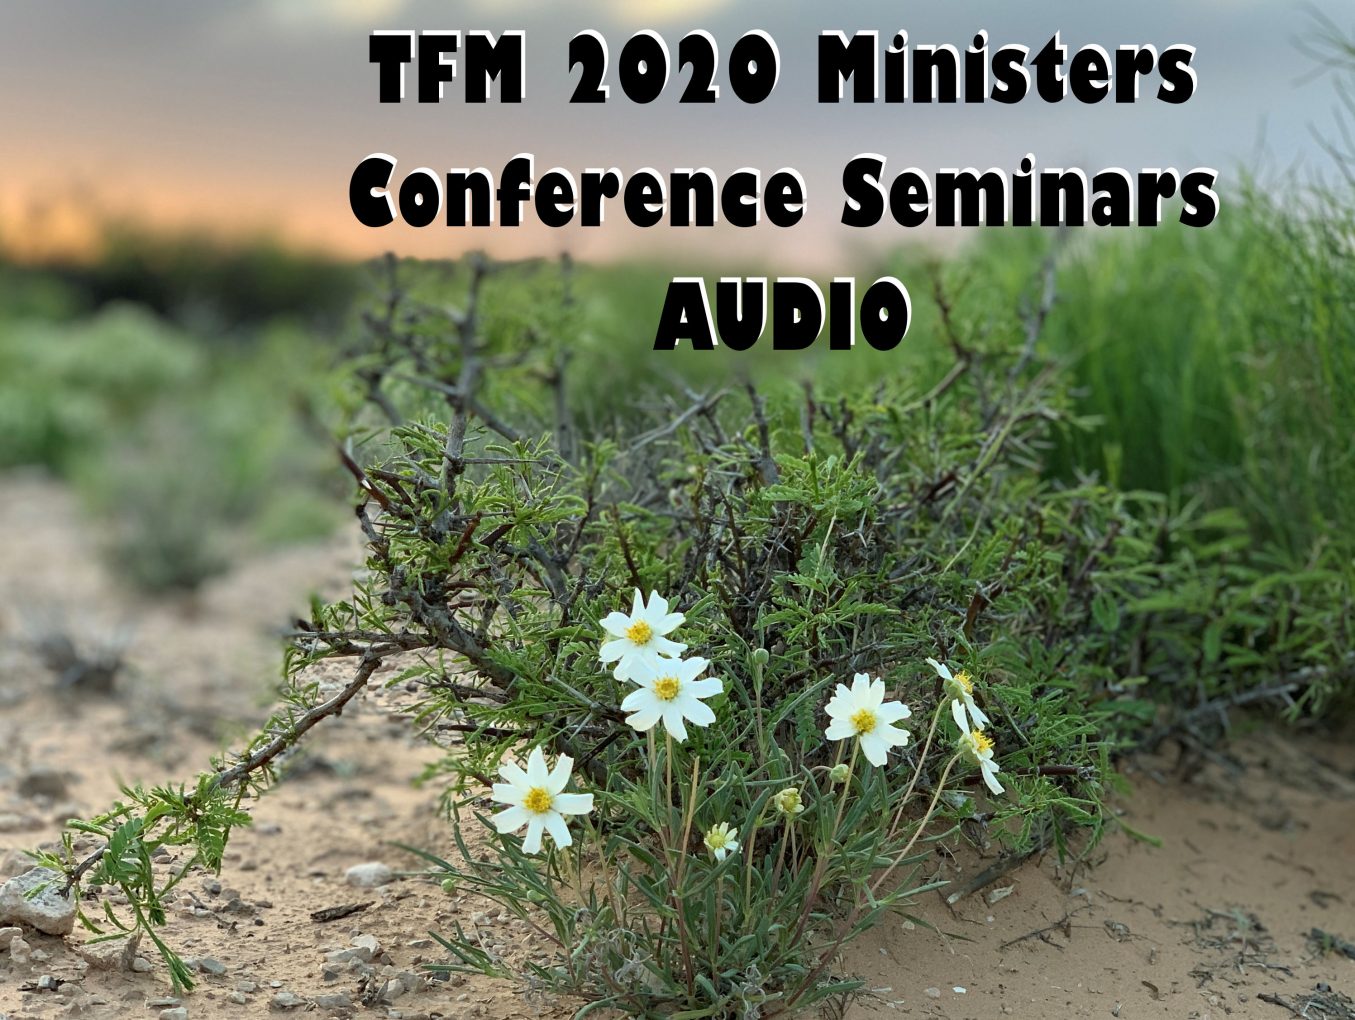 2020 Ministers Conference Seminars - AUDIO